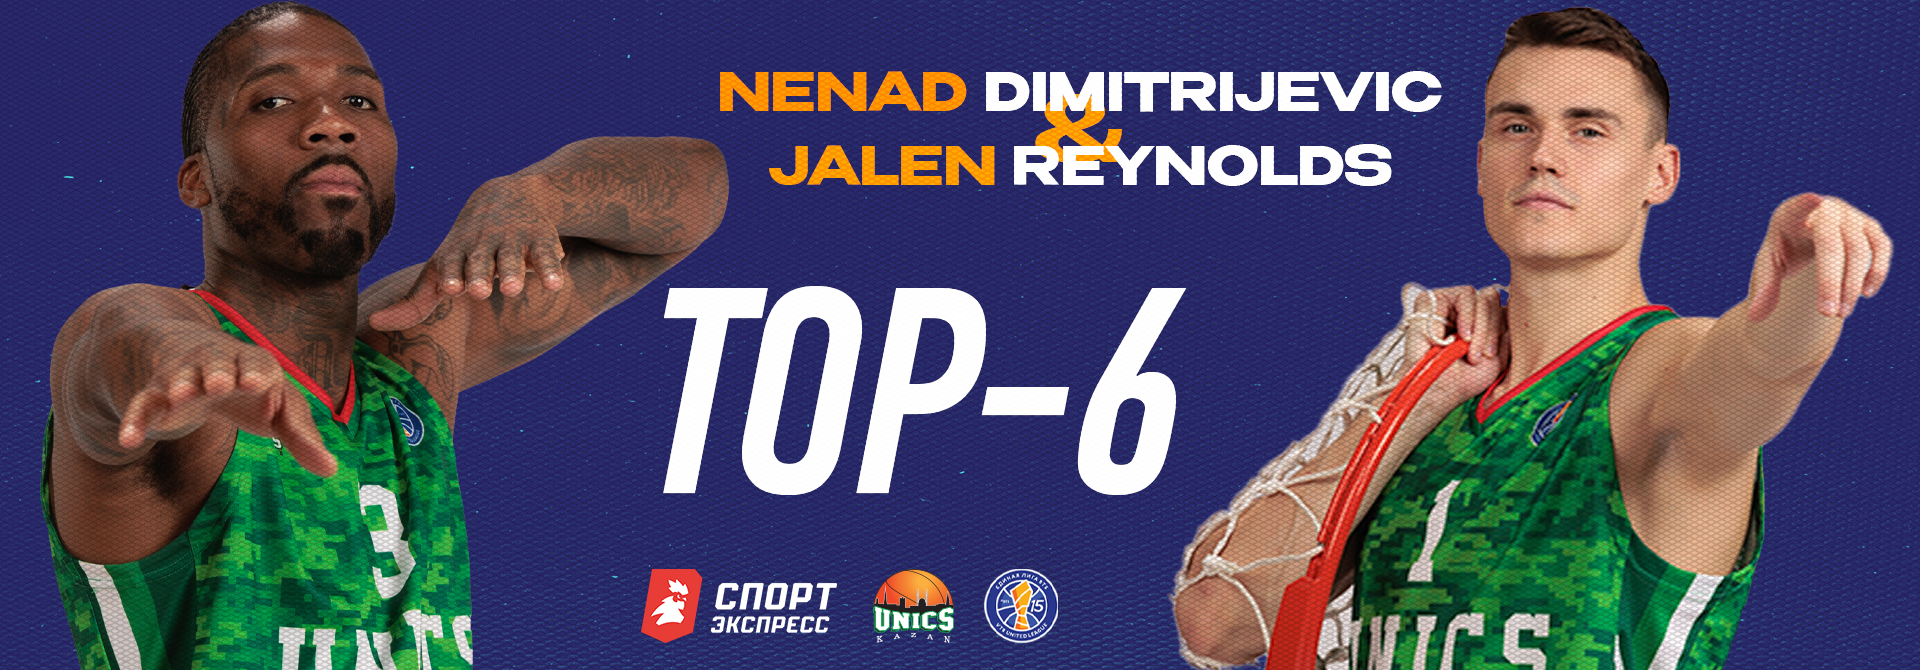 Dimitrijevic and Reynolds are in the top 6 players of the regular season according to the results of a survey of basketball players